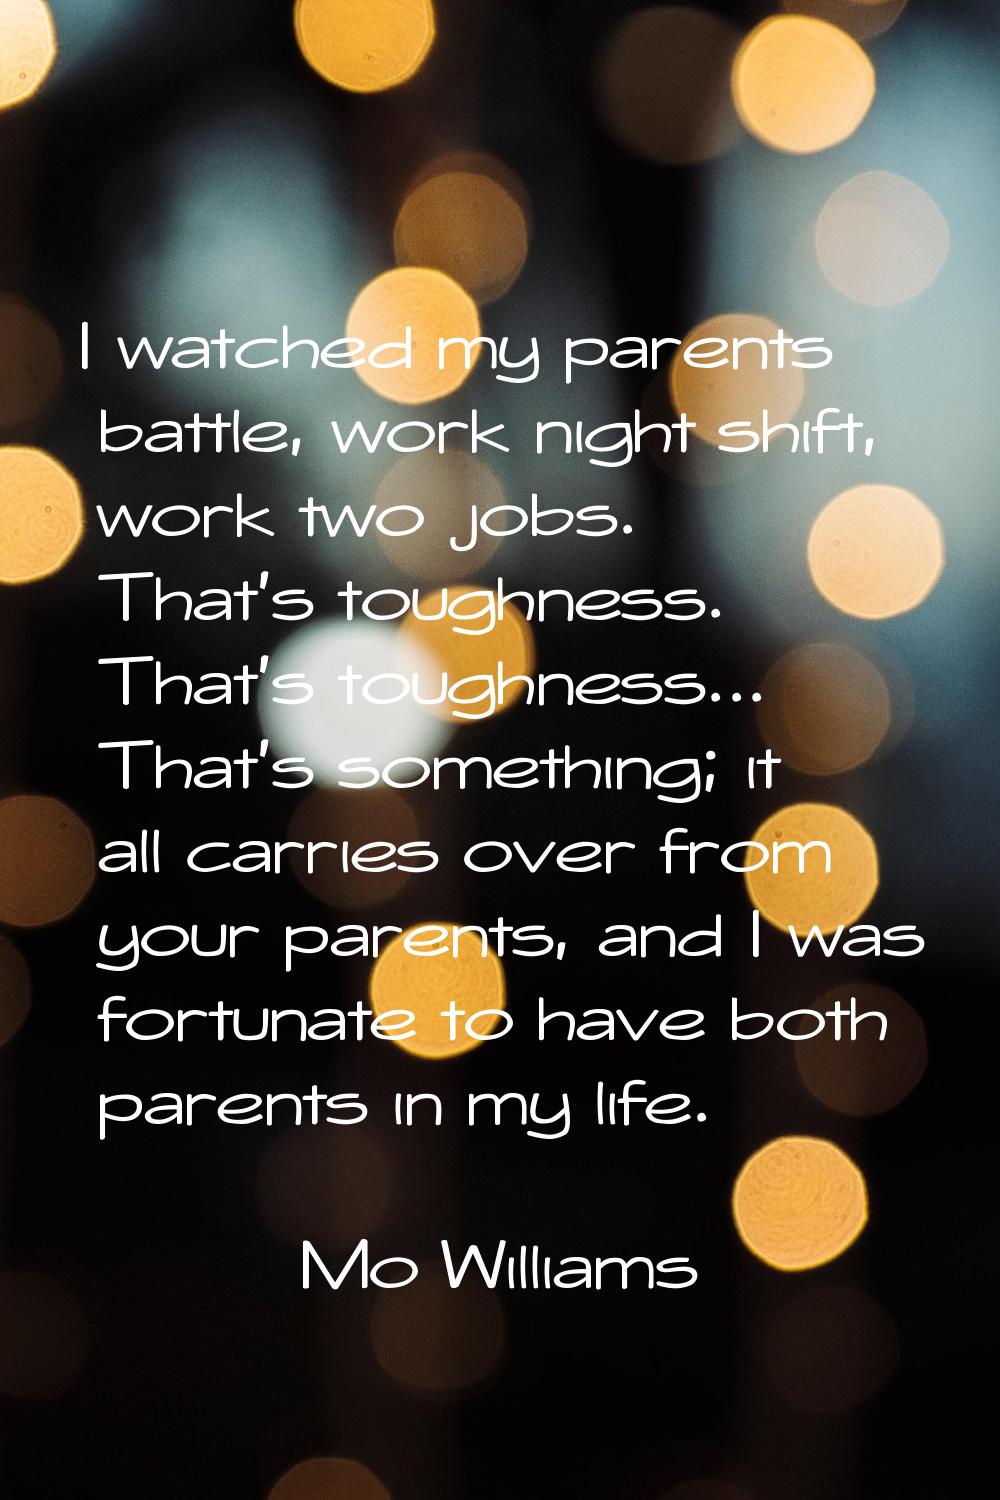 I watched my parents battle, work night shift, work two jobs. That's toughness. That's toughness...